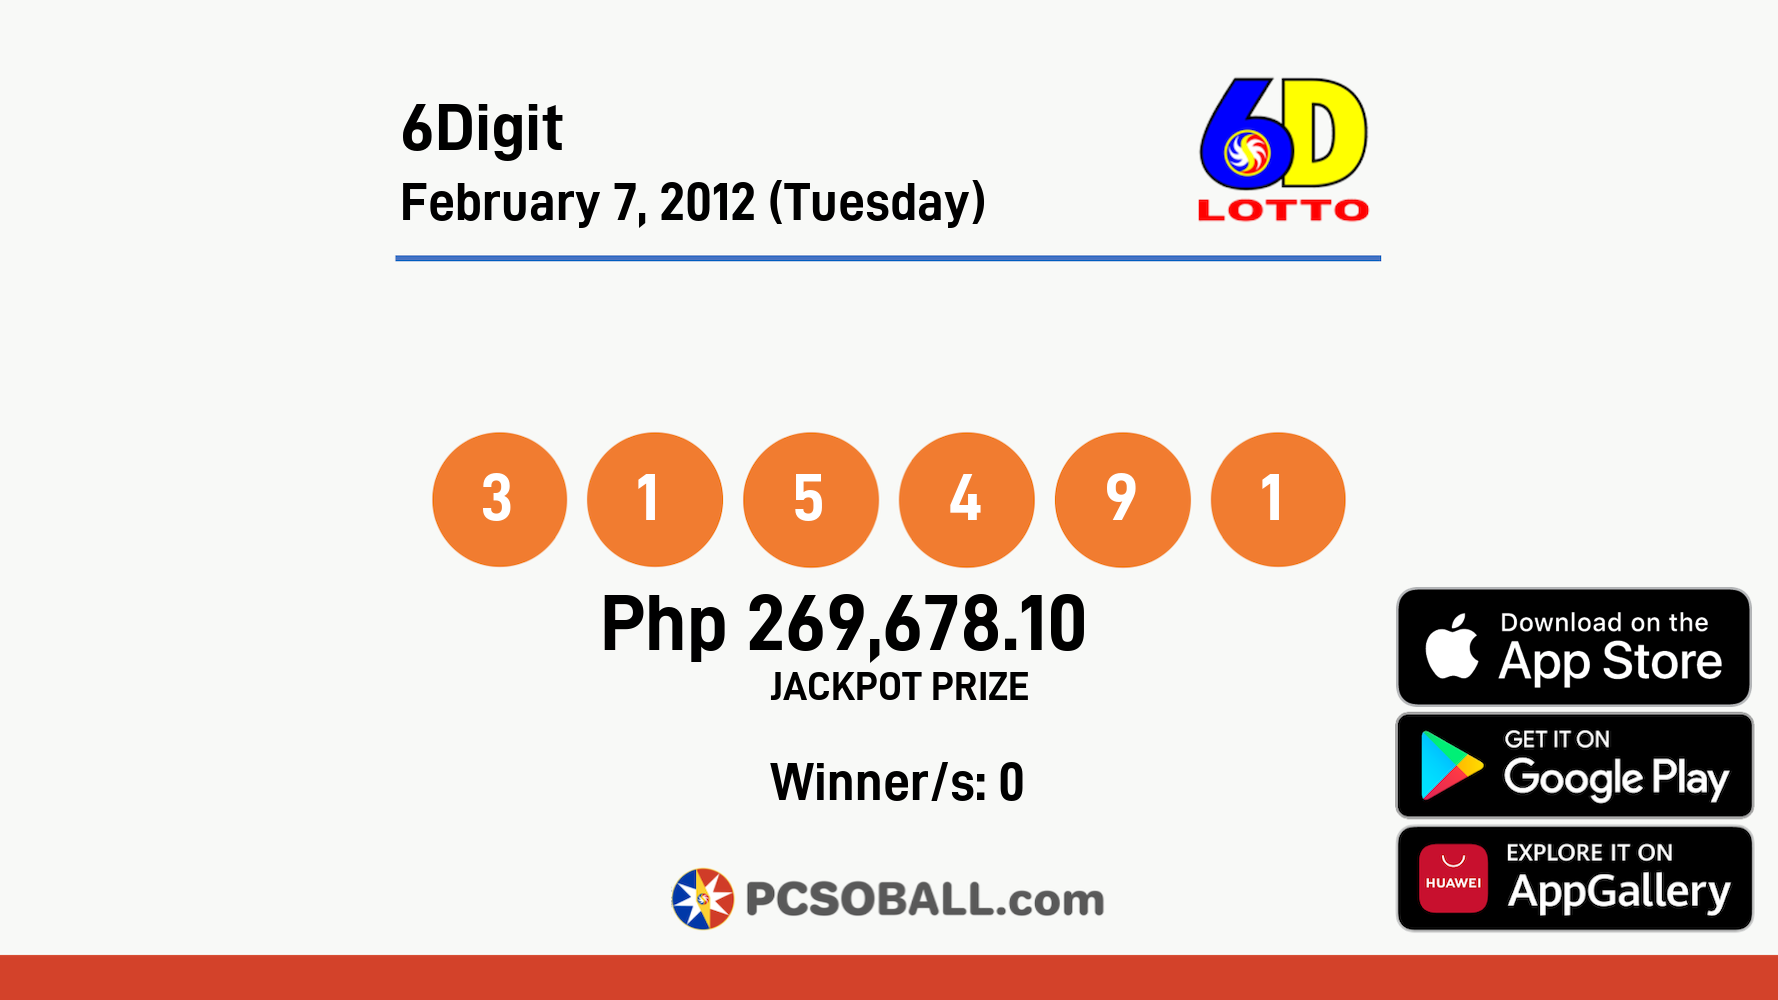 6Digit February 7, 2012 (Tuesday) Result